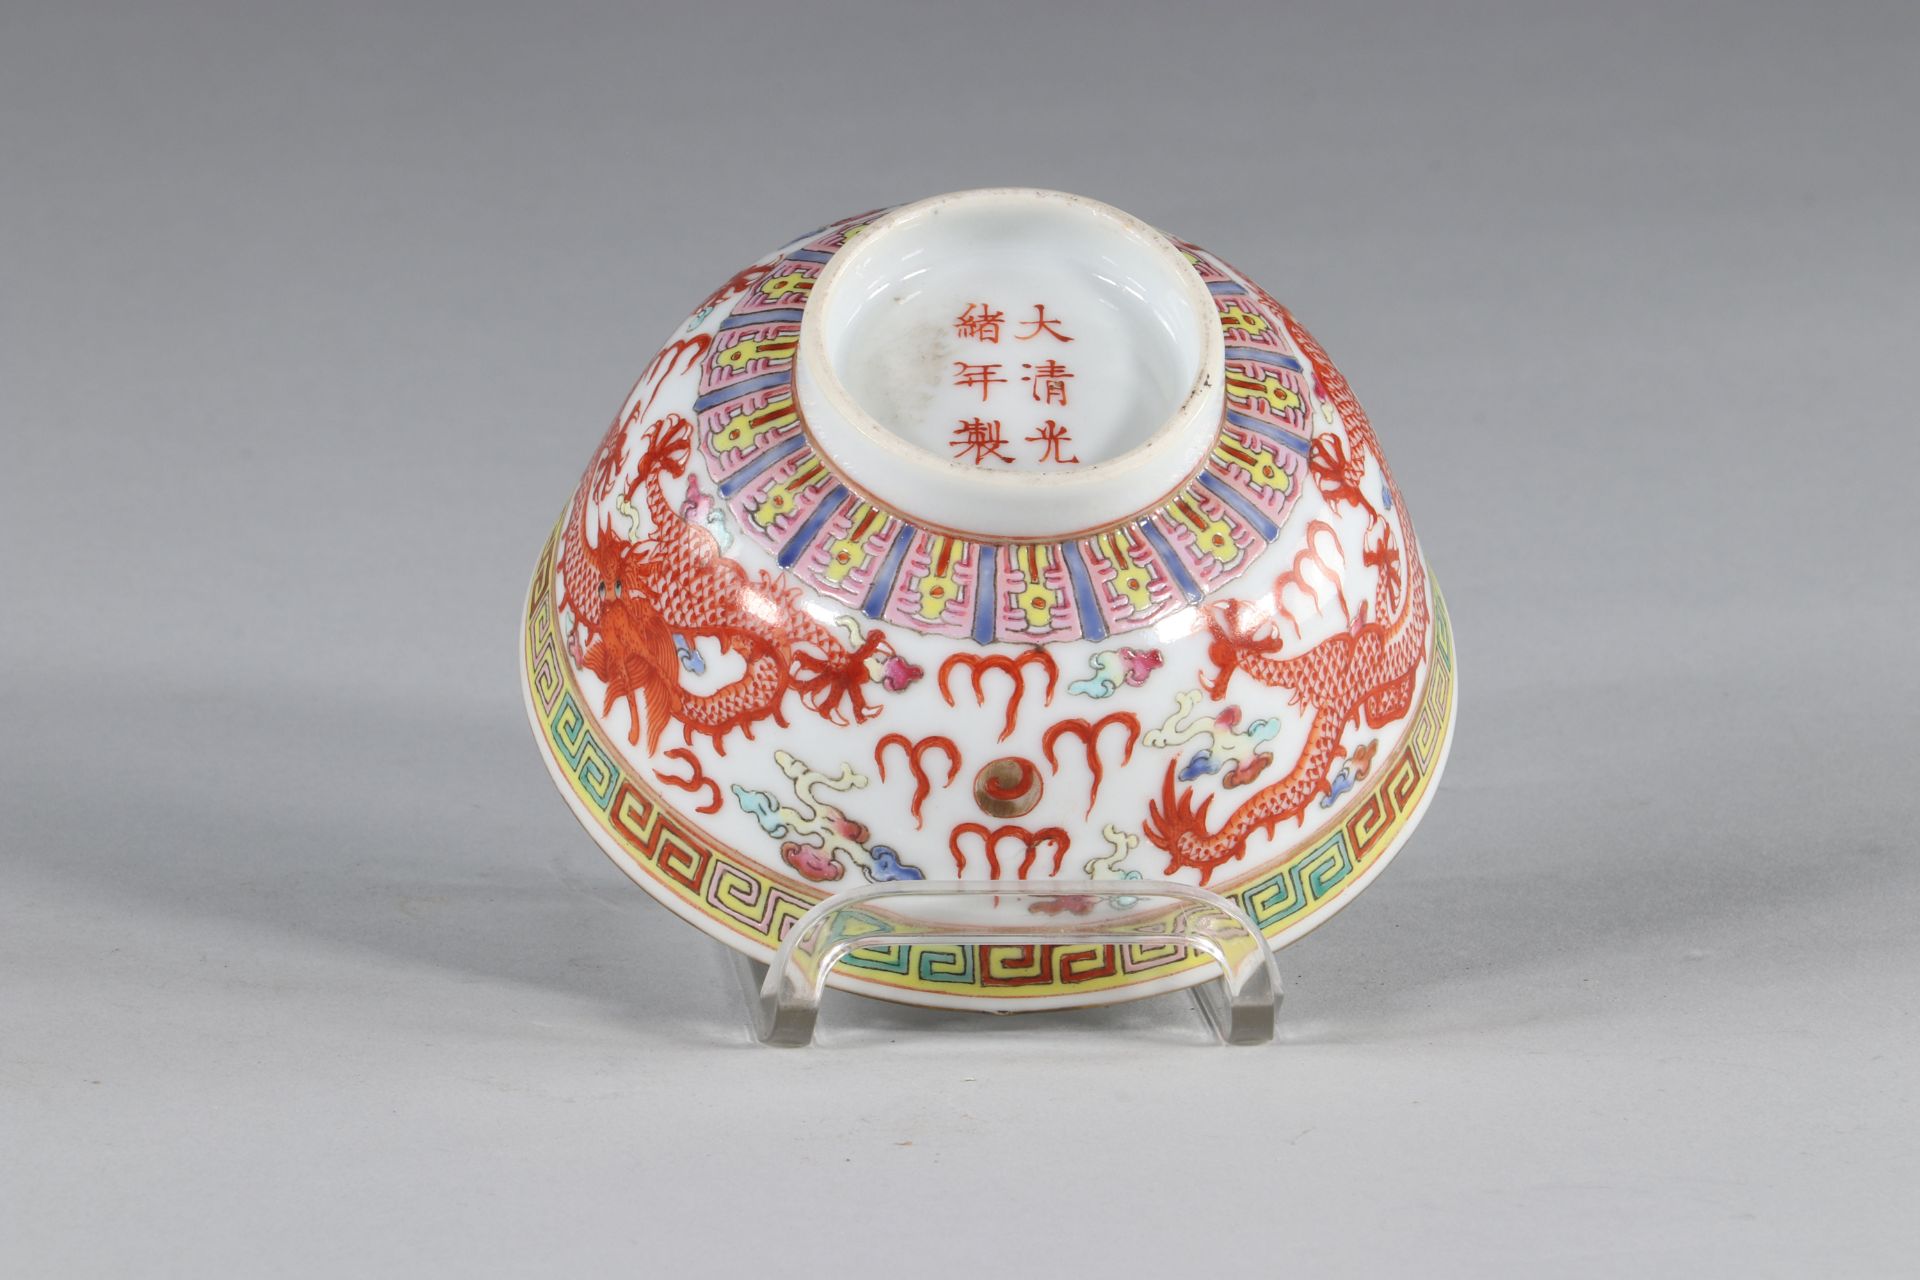 Porcelain bowl decorated with dragons, Guangxhu brand, China early twentieth. - Image 4 of 4